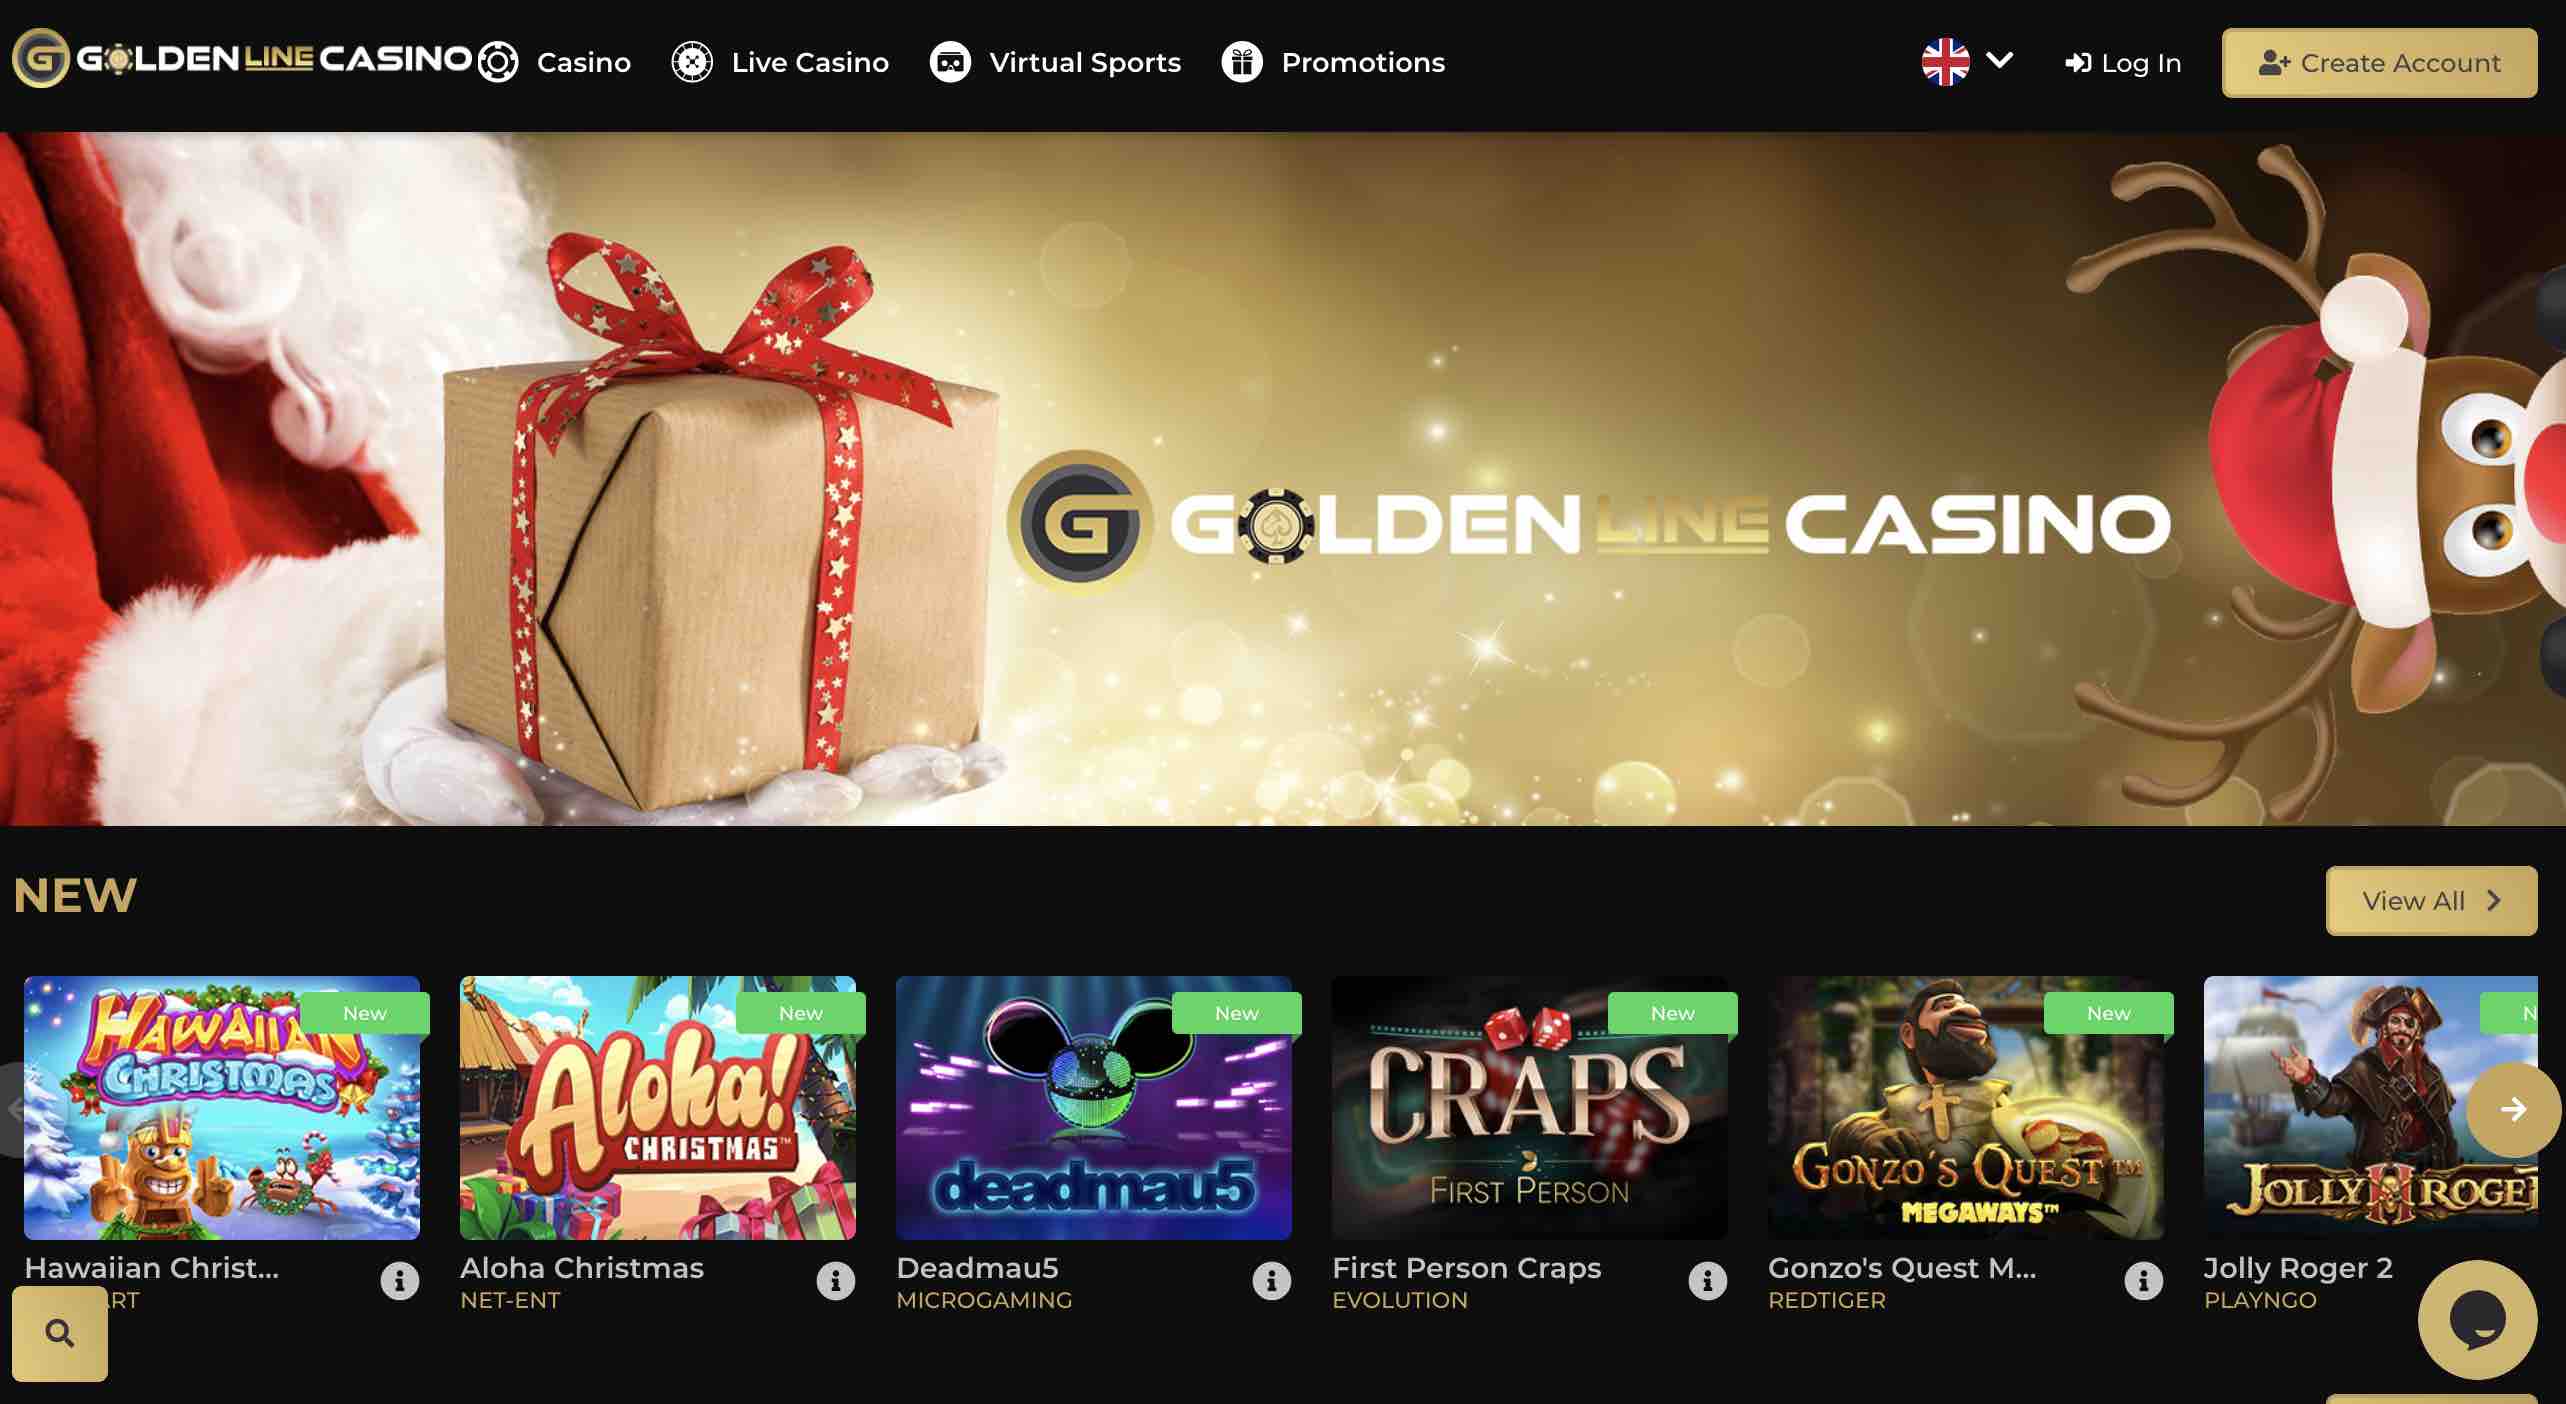 Discover Great Games at GoldenLine Casino